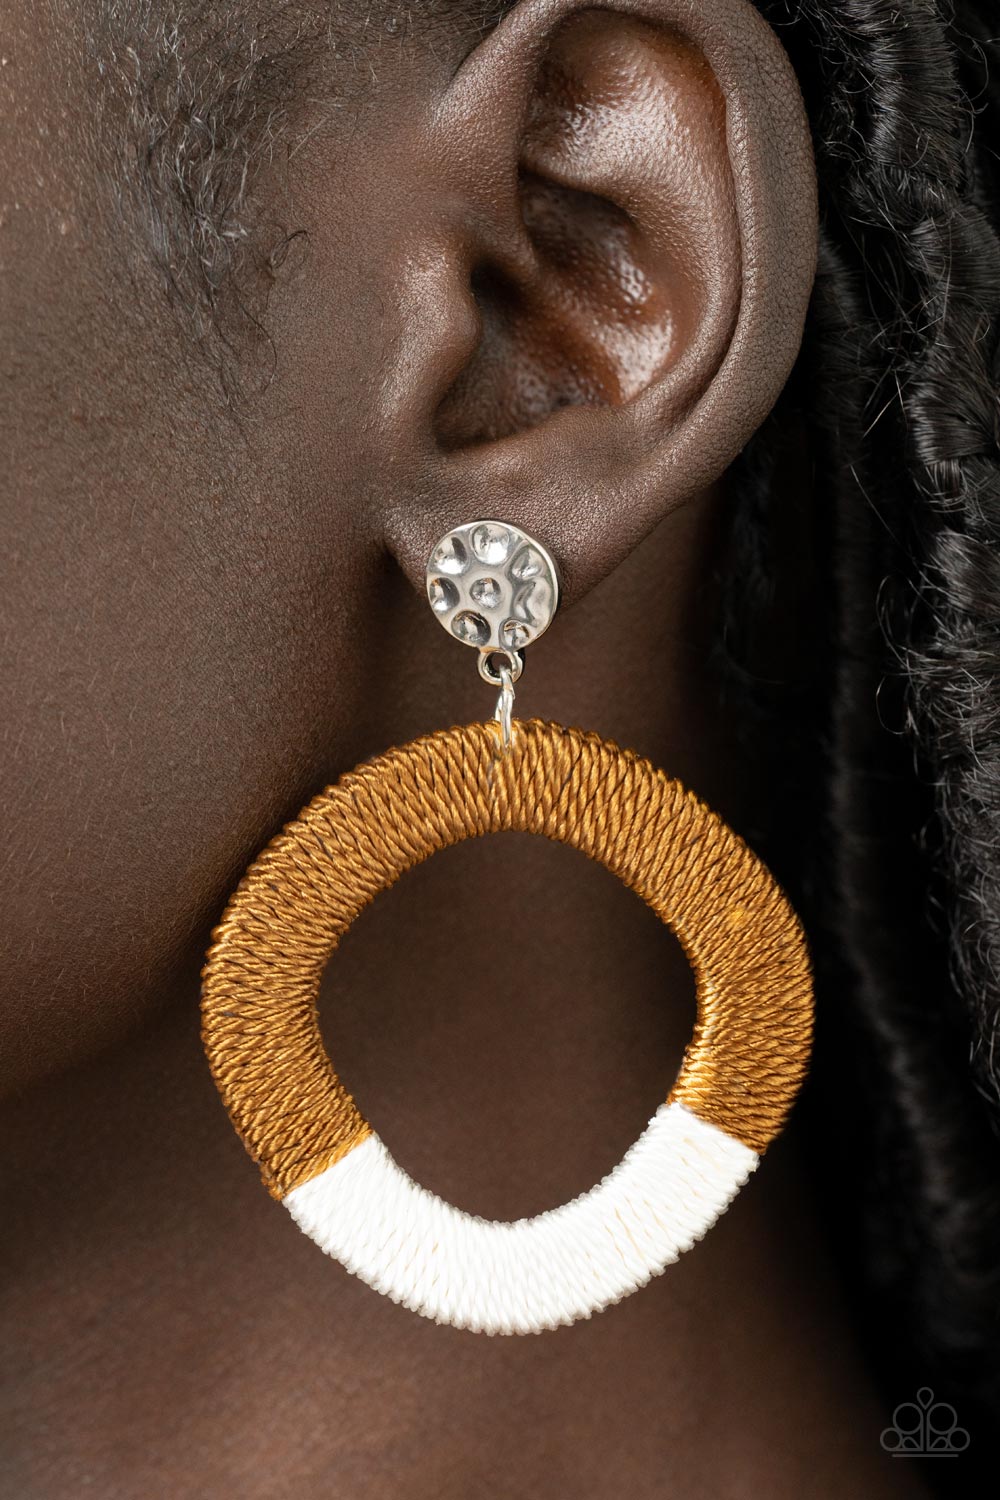 Thats a WRAPAROUND Brown Earring